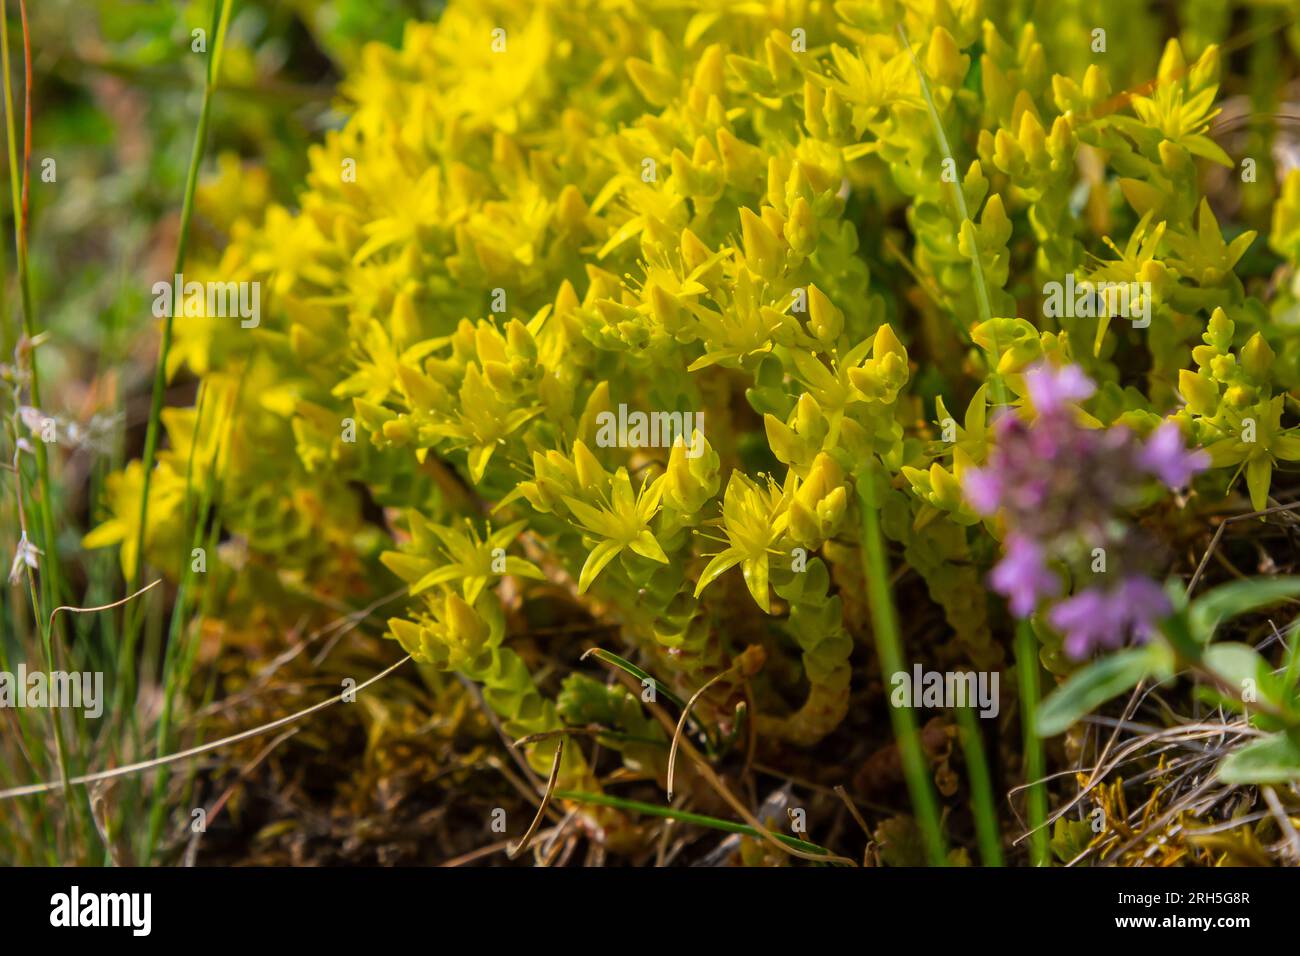 Sedum acre, Sedum album is the perennial herbaceous succulent plant with numerous rising stems covered with small thick leaves. Stock Photo